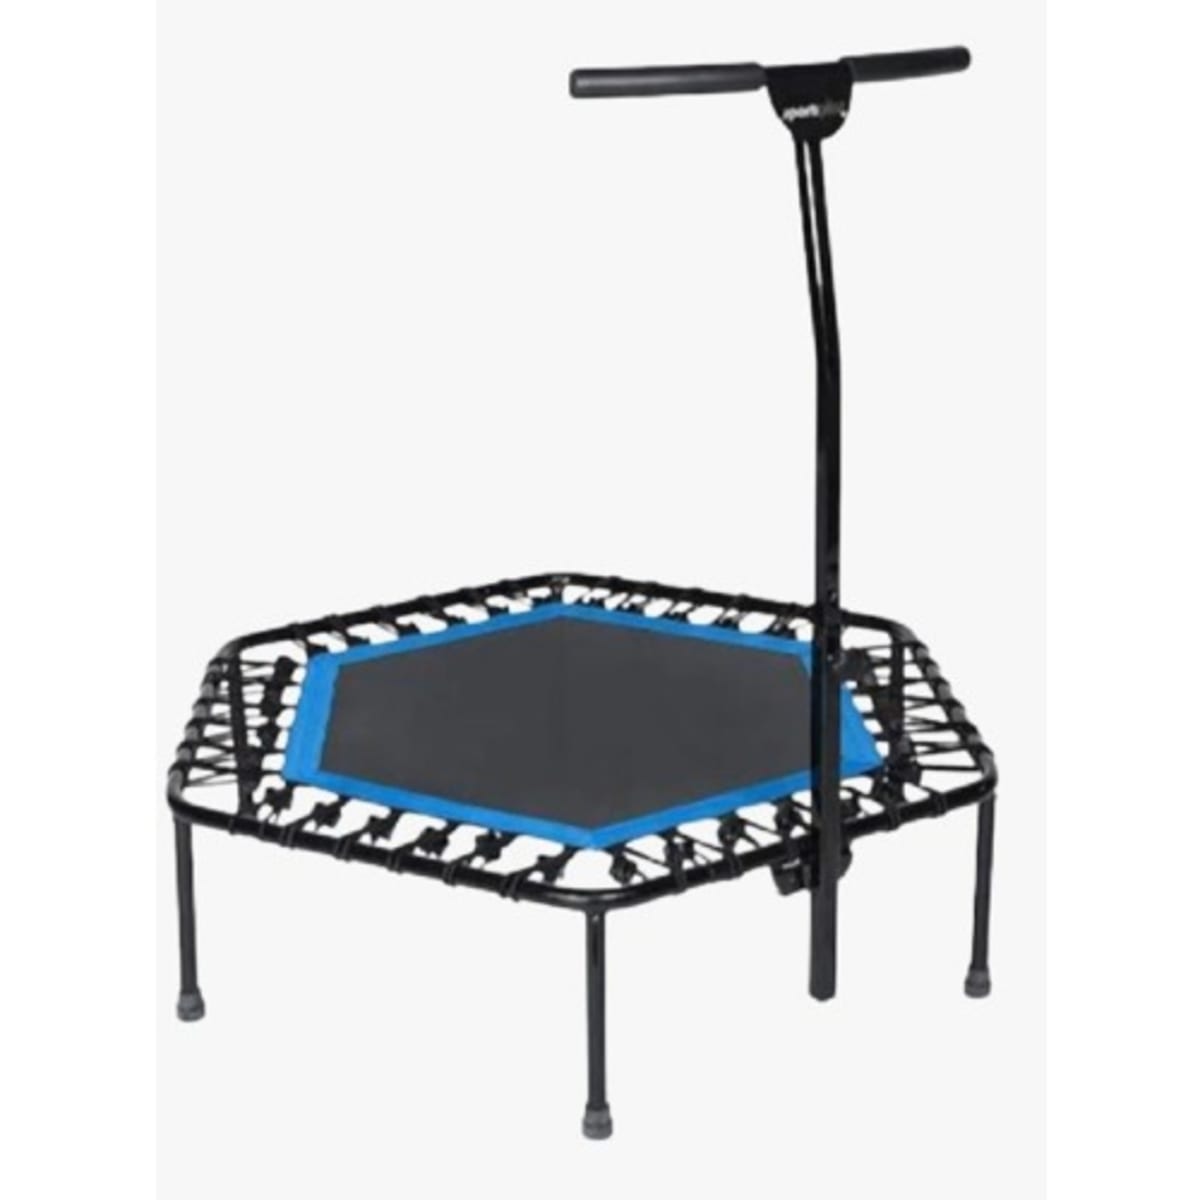 Trampoline With Optional Safety Handle